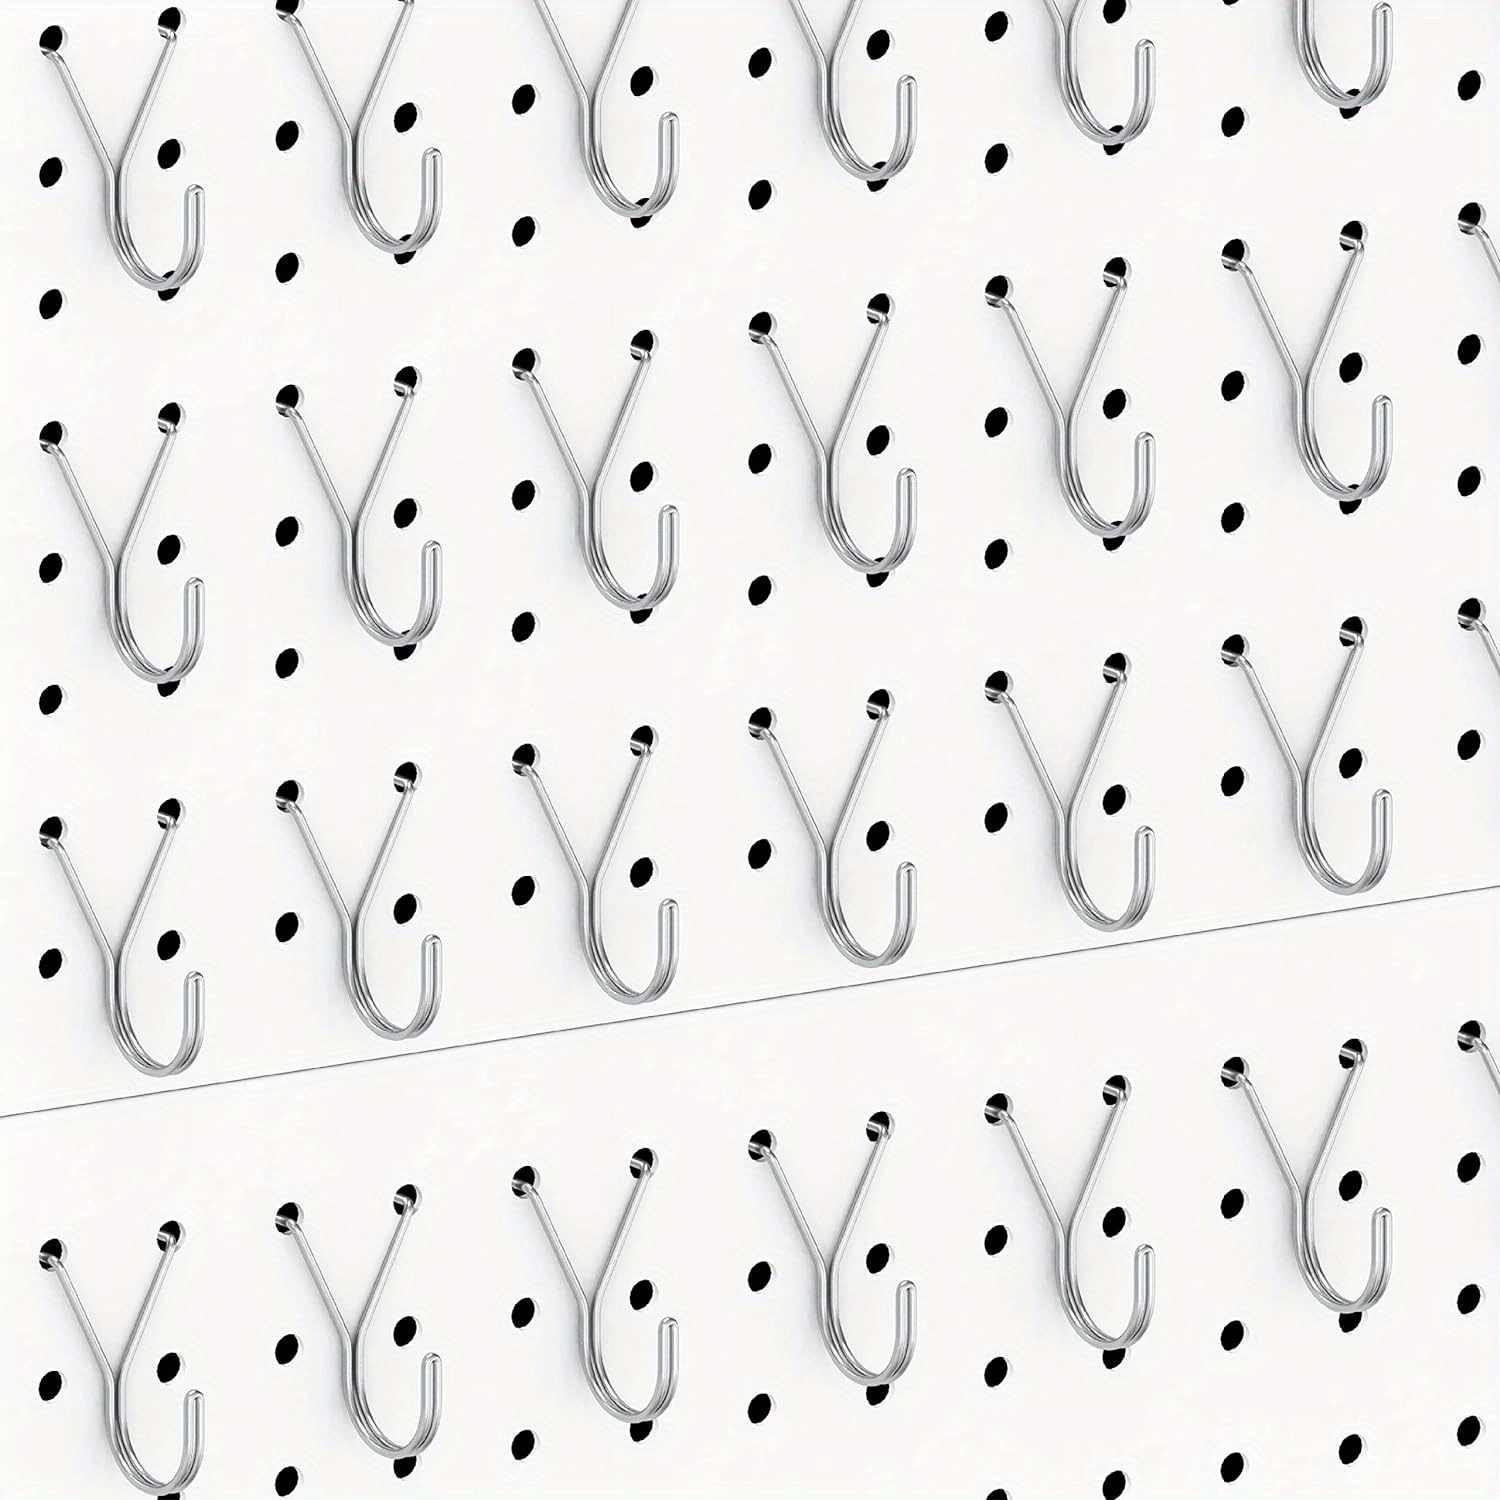 50 Plastic White Peg Pegboard Hooks 4 Inches Long by 1/8 Thick